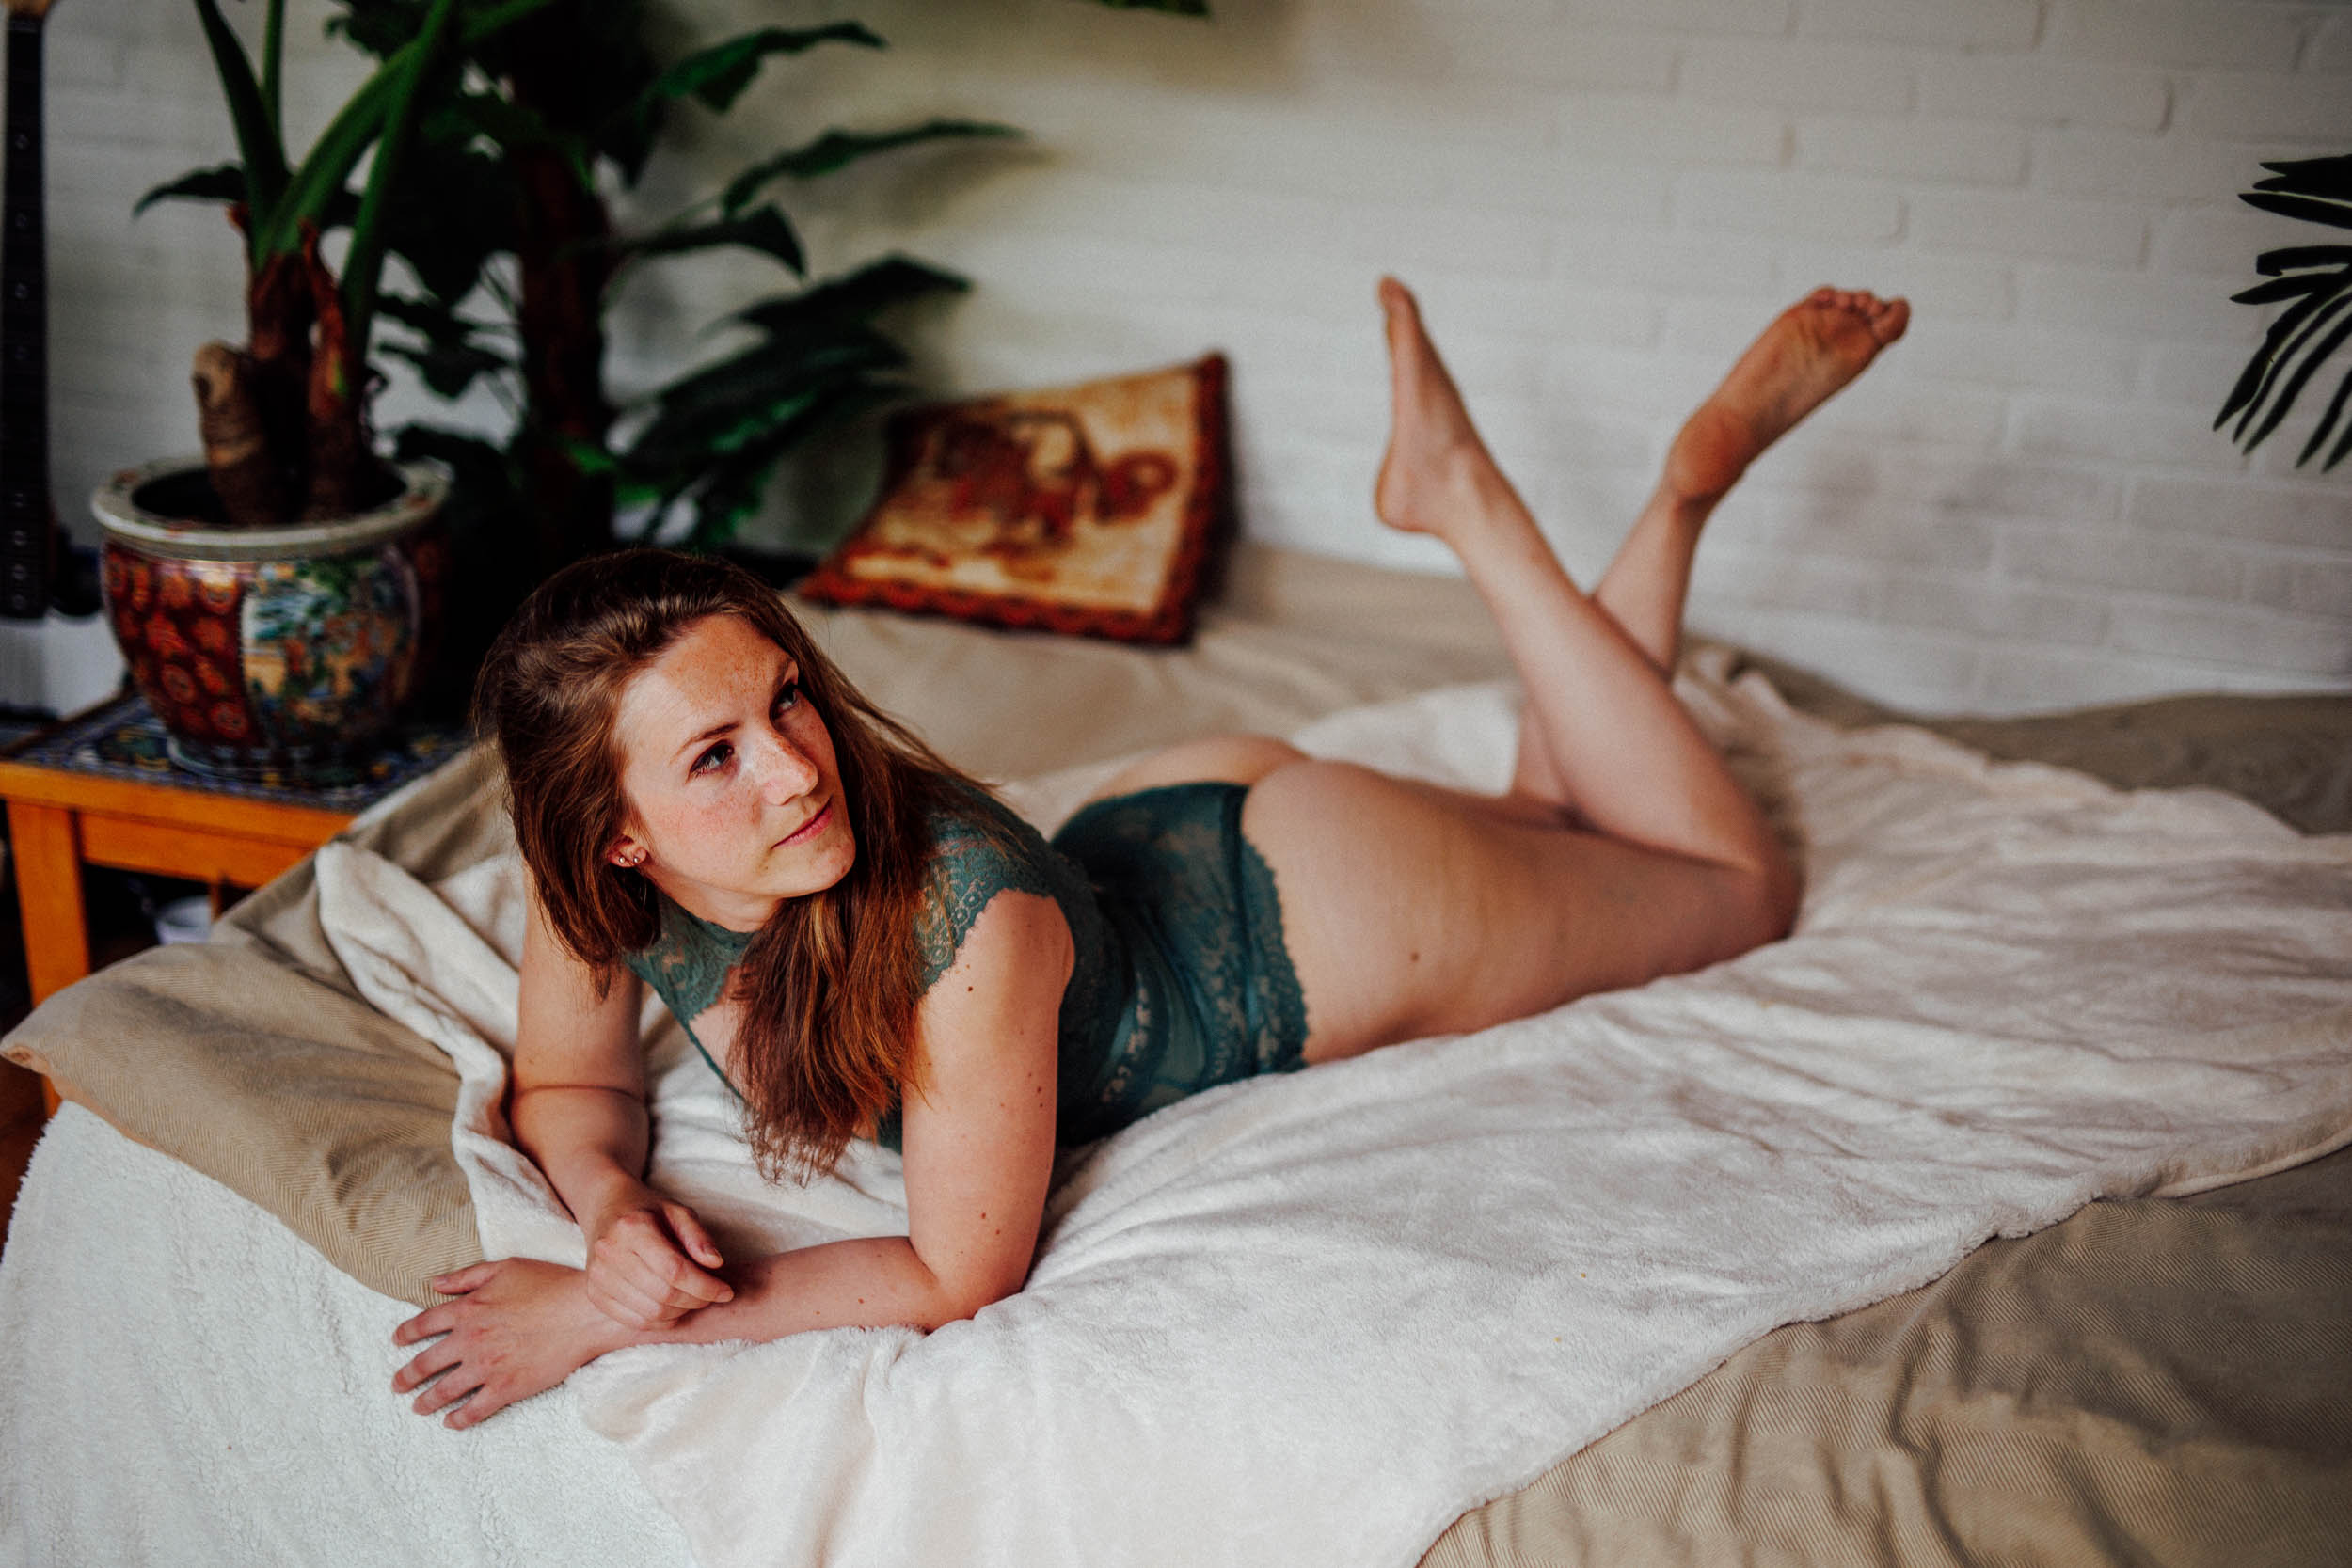 A woman in a green lace lingerie set lies on her stomach on a bed, supported by pillows. The scene, perfect for boudoir photos, includes plants and a side table in the background.